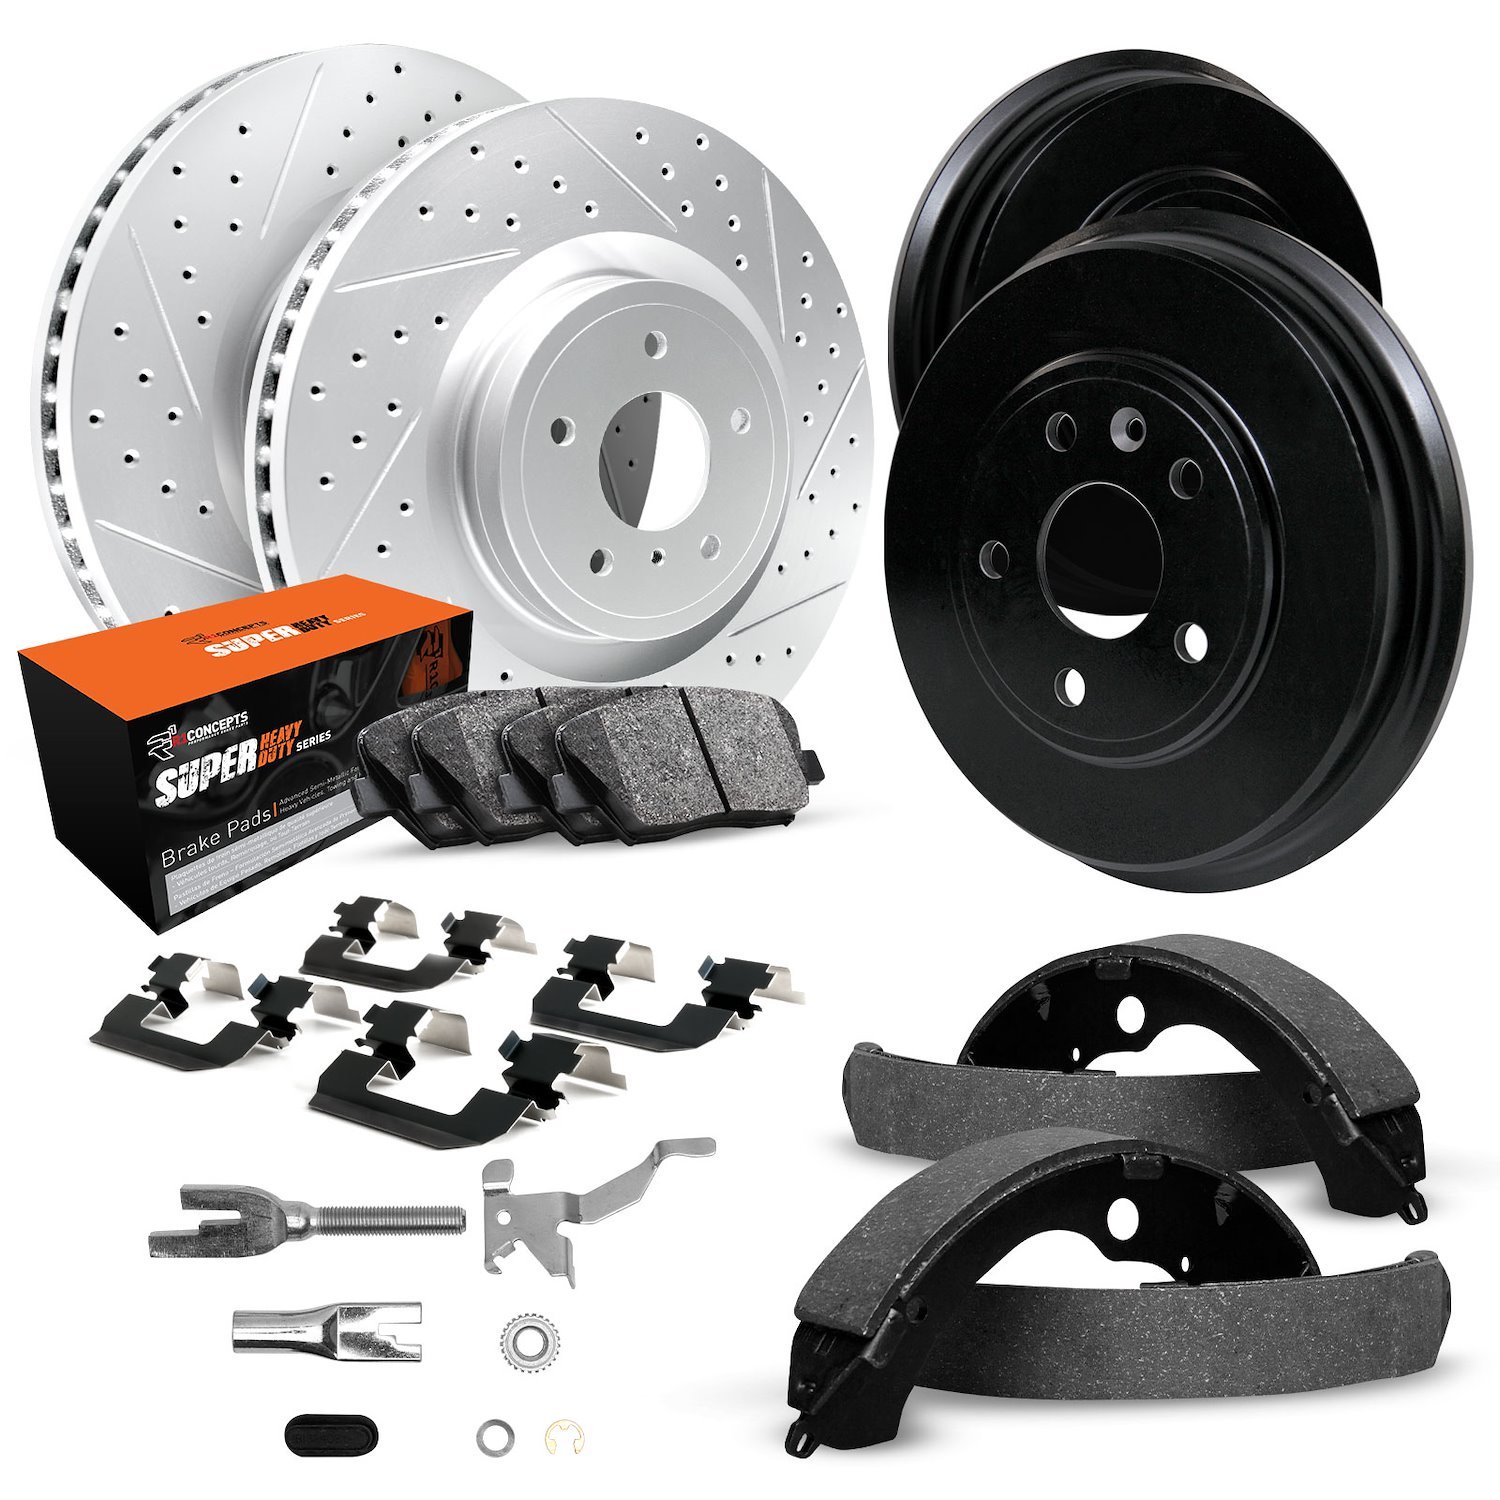 GEO-Carbon Drilled/Slotted Rotors/Drums w/Super-Duty Pads/Shoes/Hardware/Adjusters, 1991-1999 Mopar, Position: Front/Rear